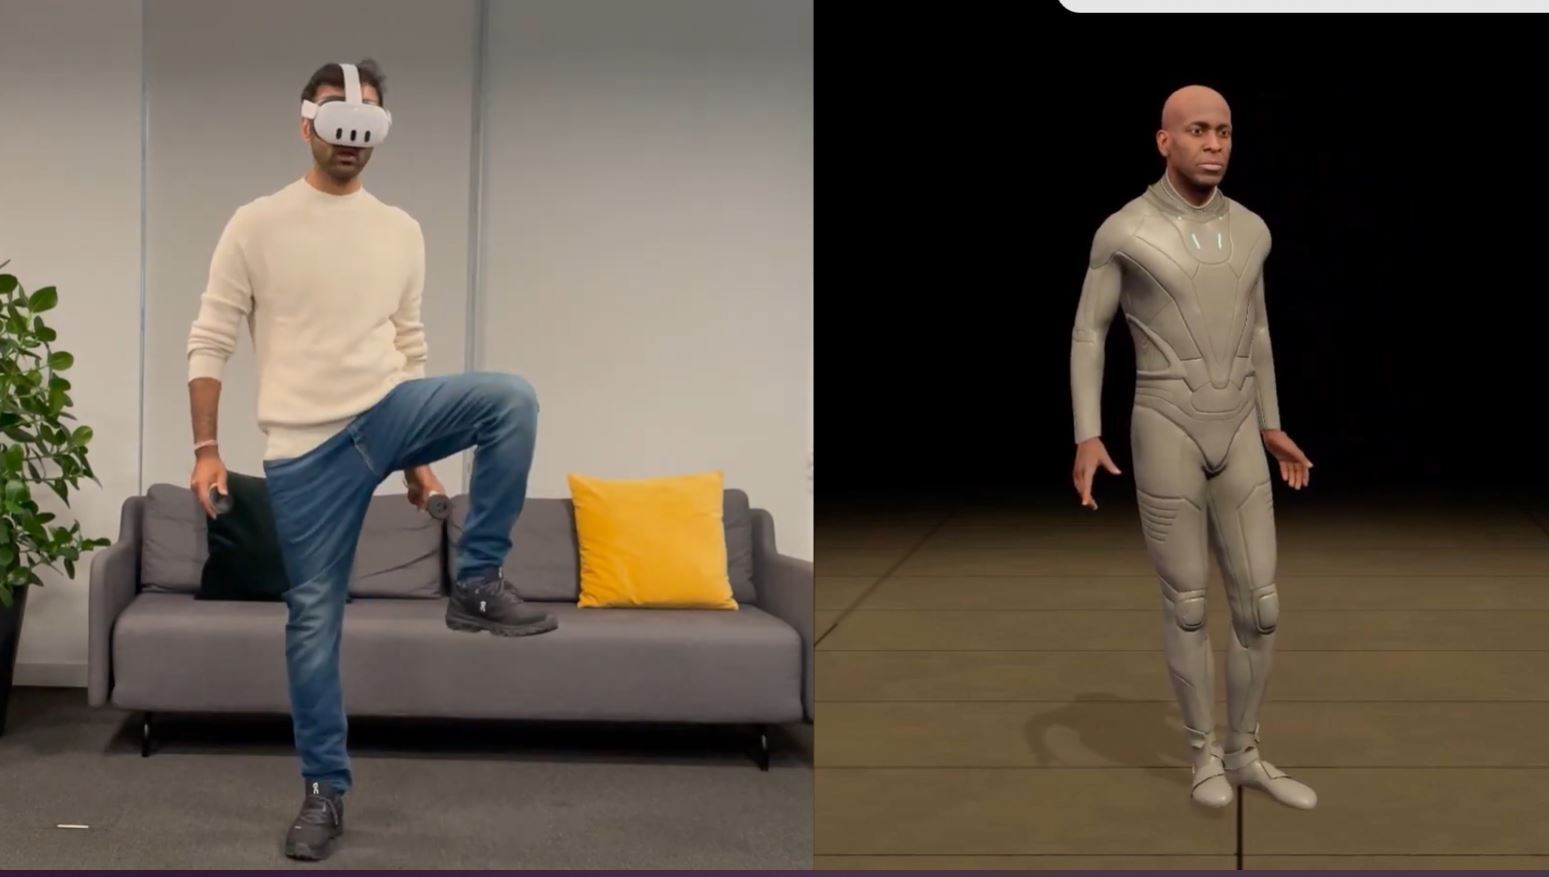 An example of knee movement being difficult to decipher for AI-fueled legs. - The Quest 3 now supports full body tracking and MR occlusion! But why should you care?